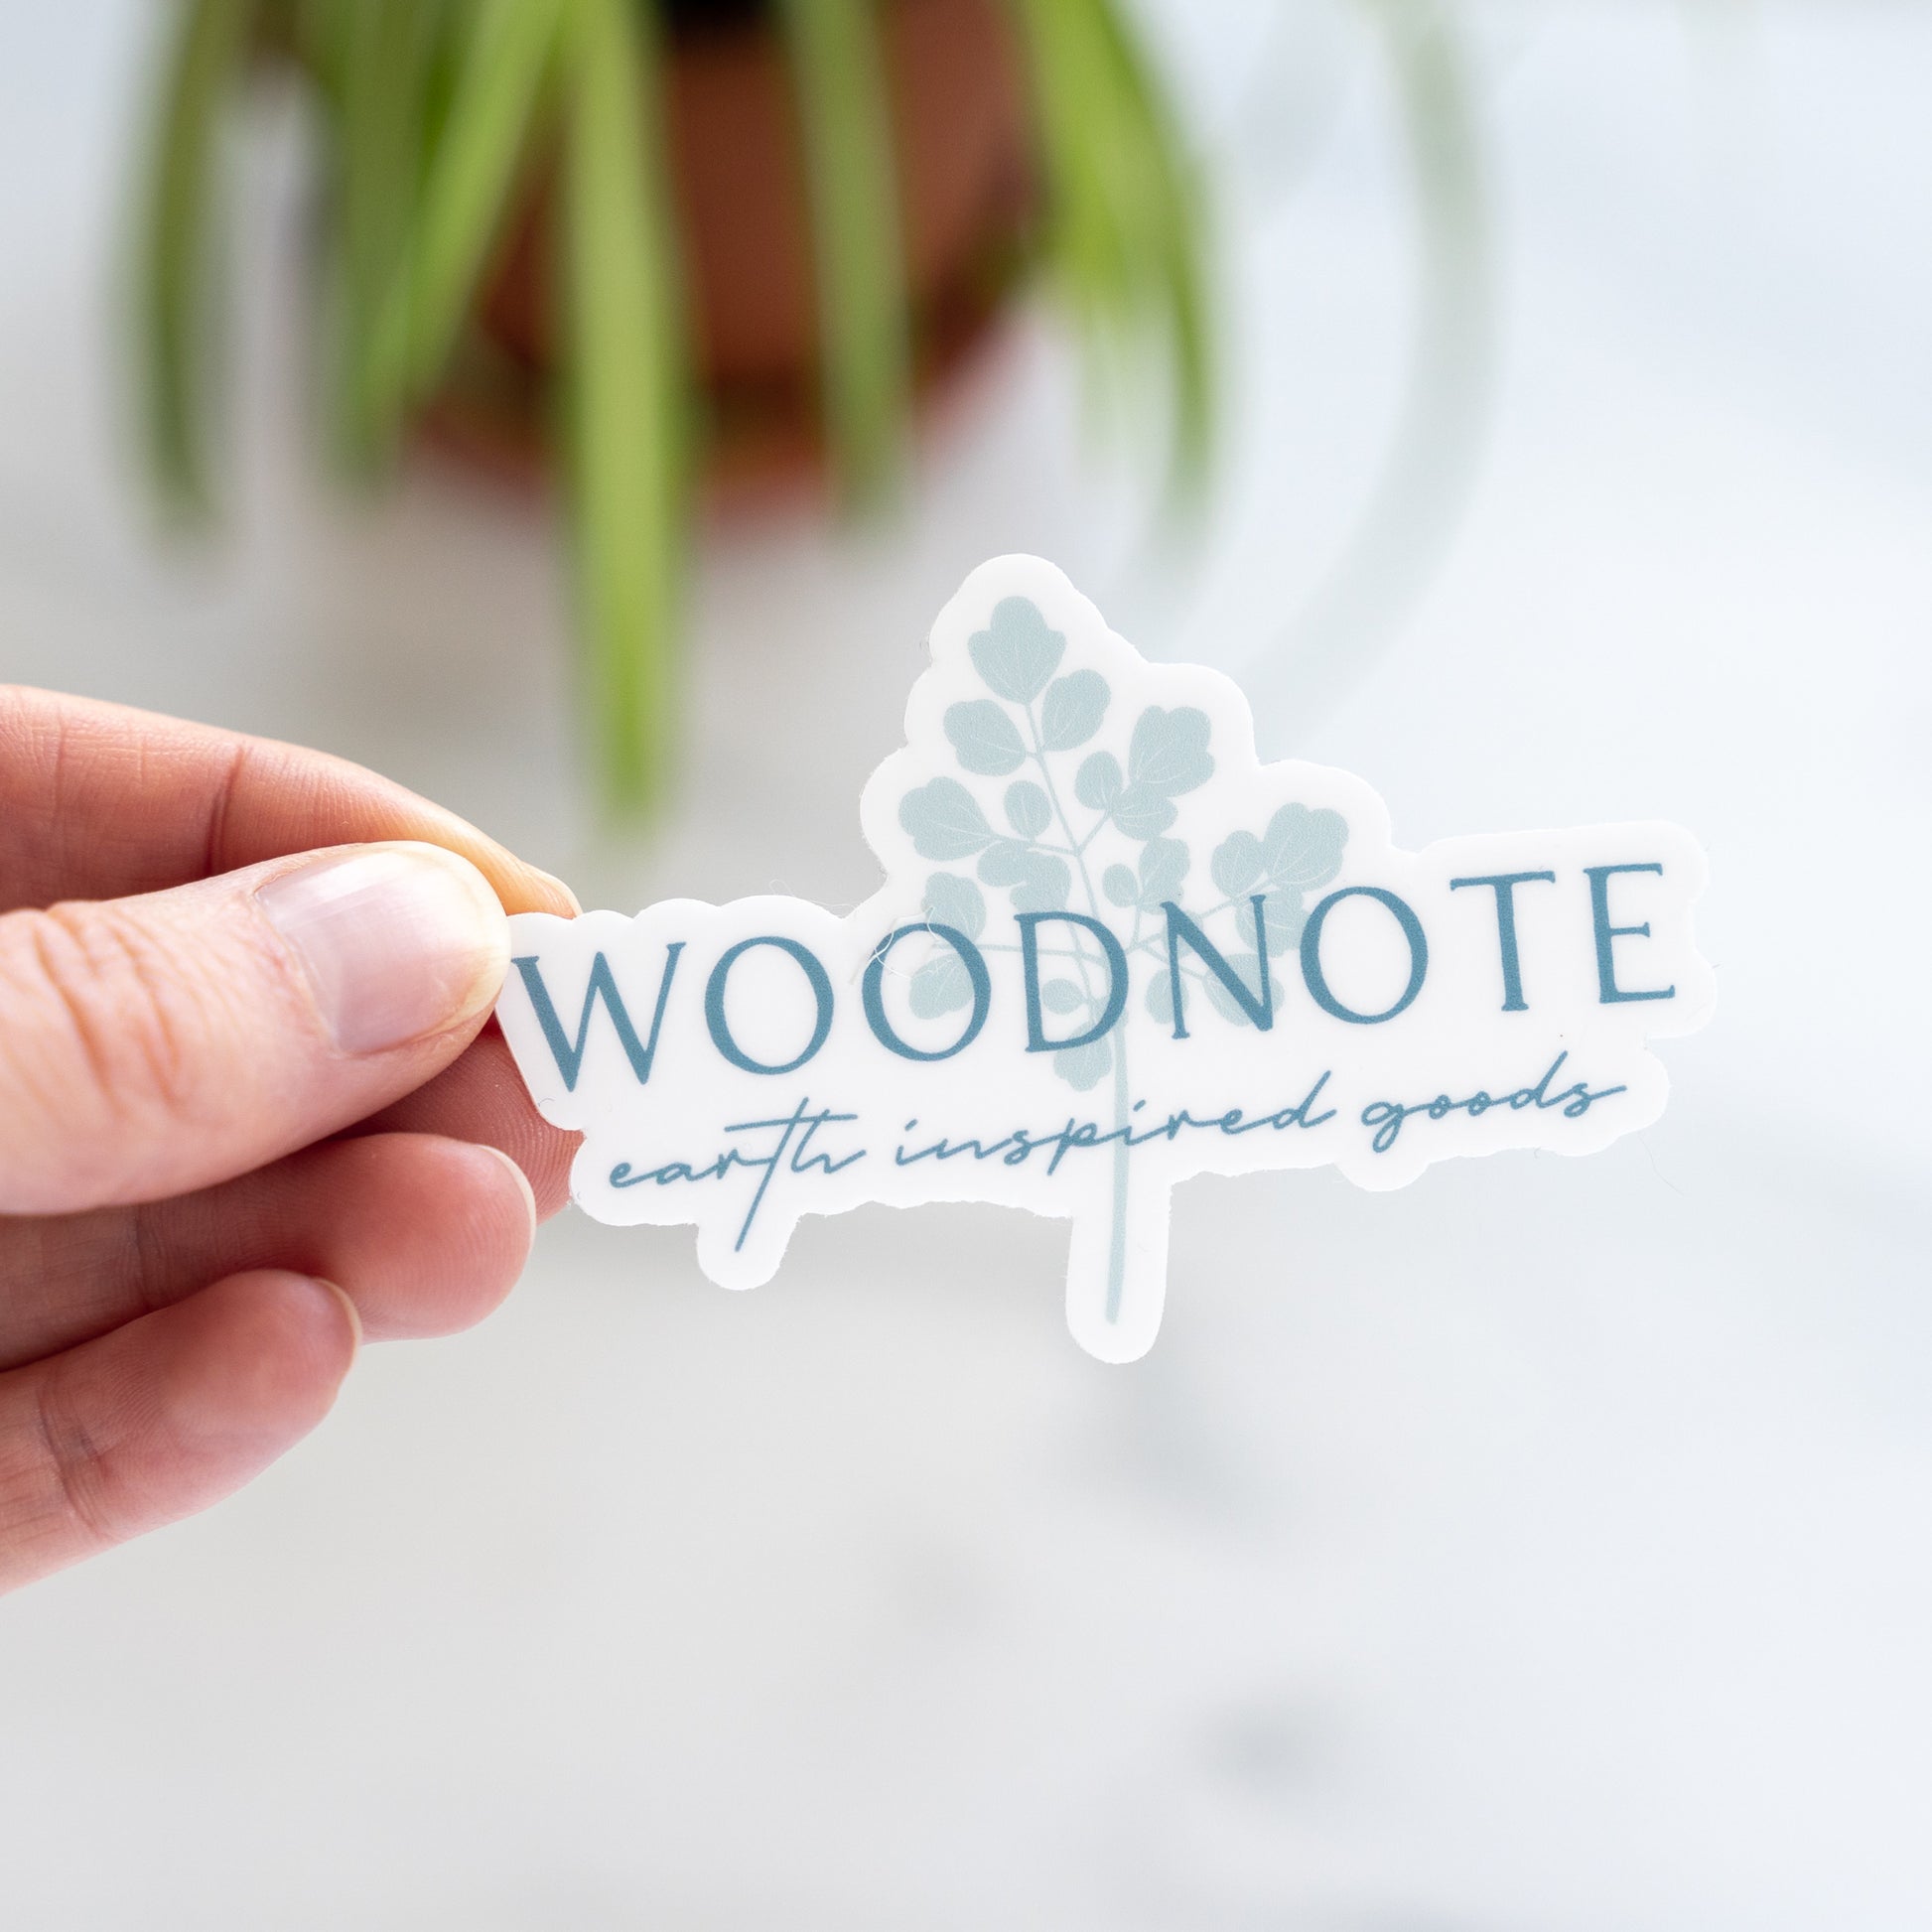 Hand holding a blue Woodnote logo sticker